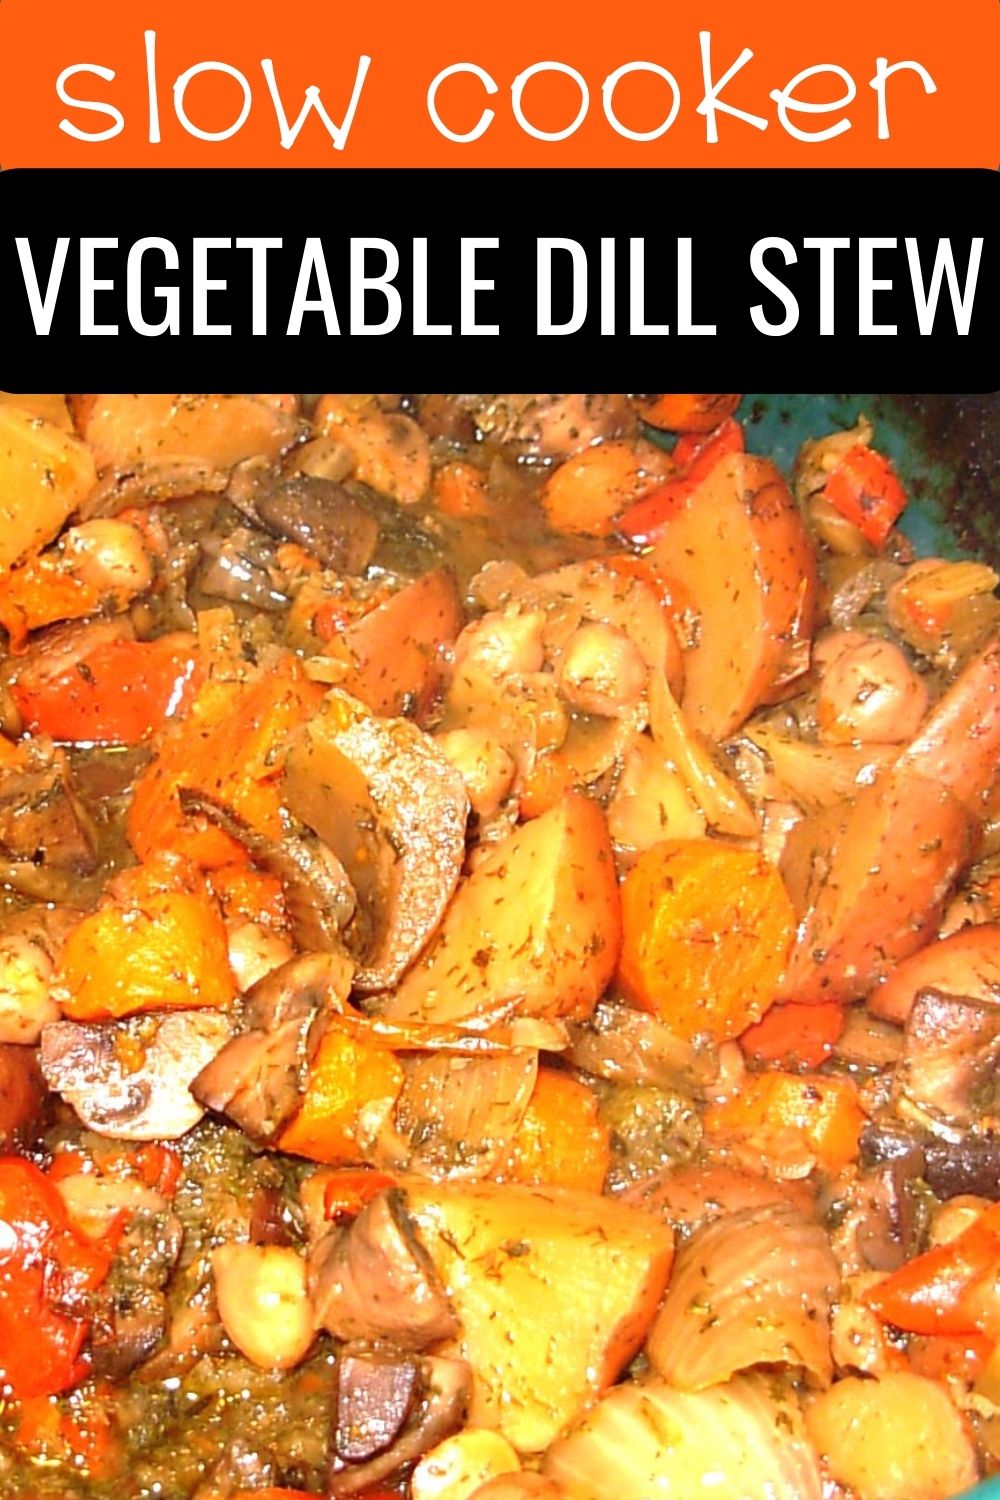 Slow cooker vegetable dill stew.